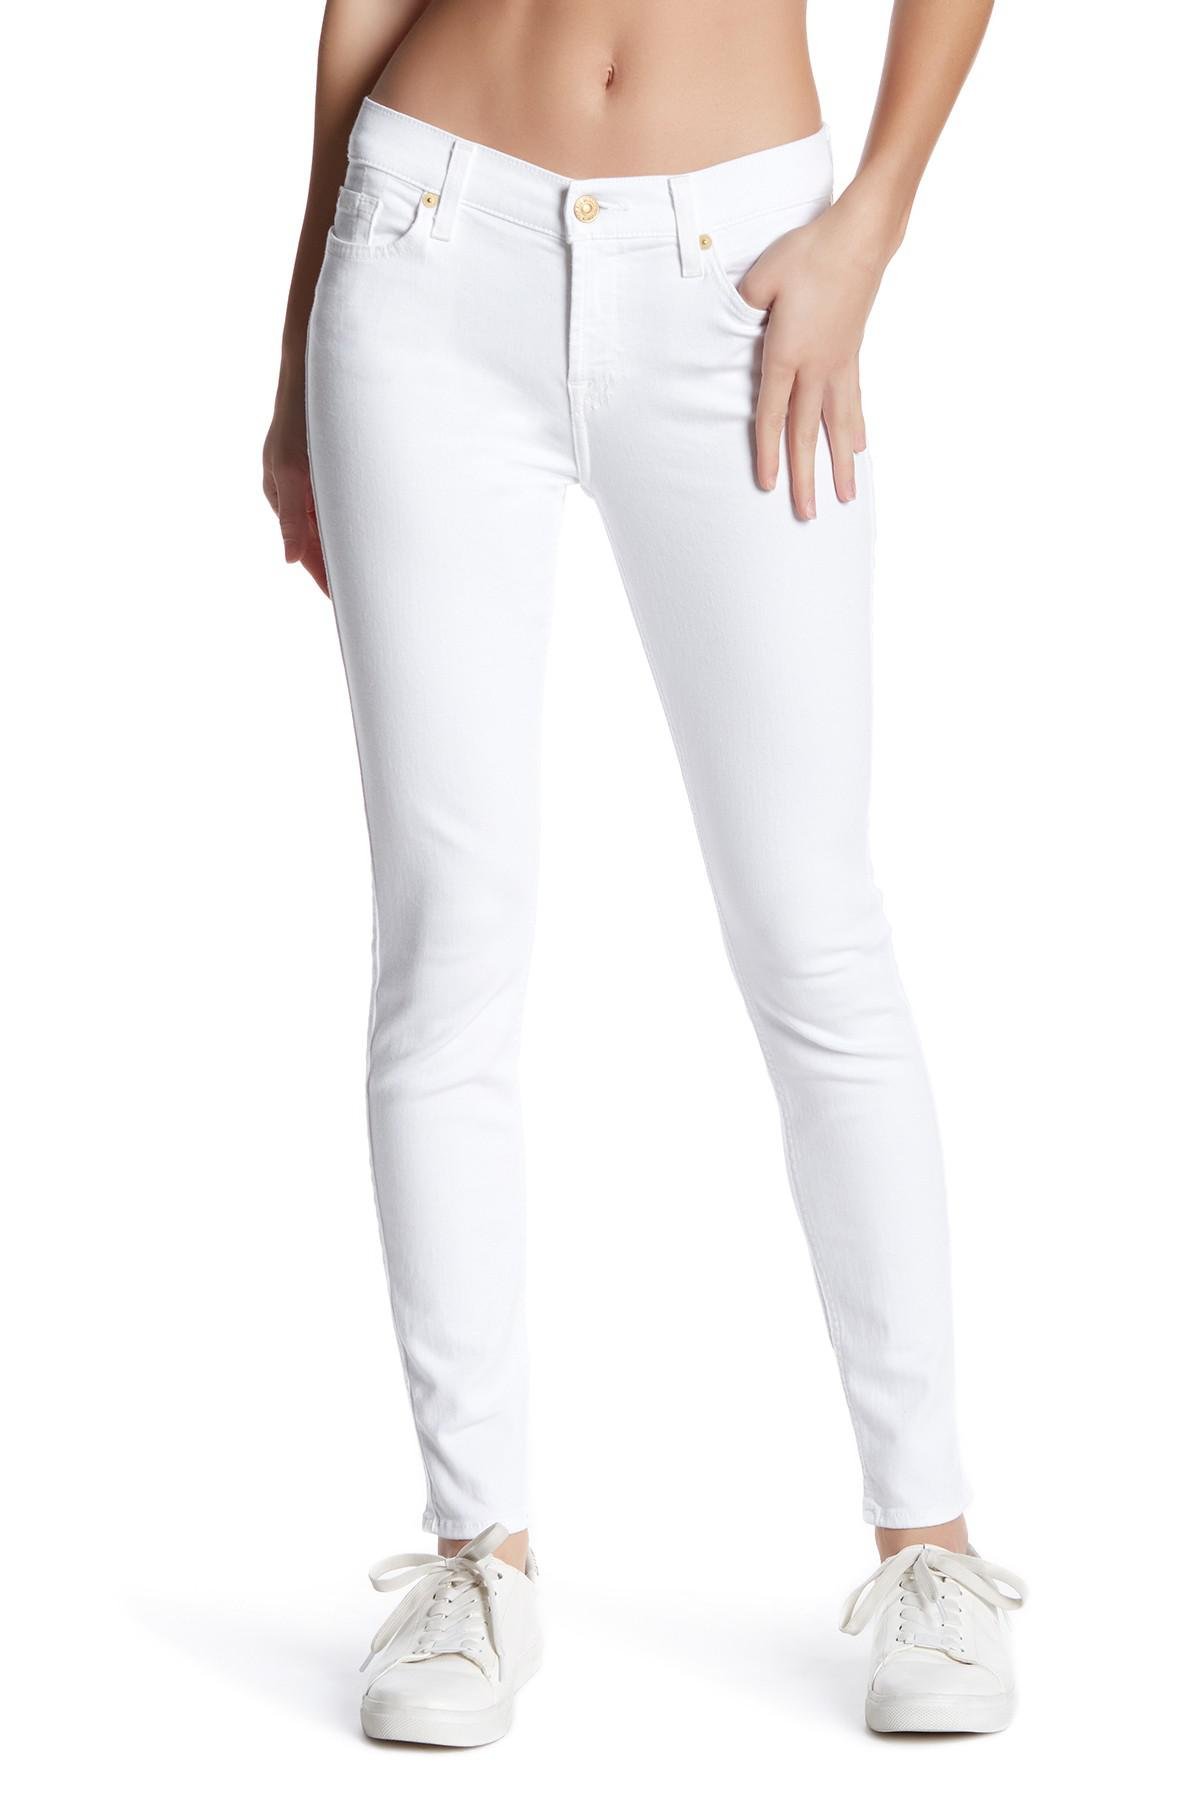 7 For All Mankind Gwenevere Size 28 - www.glwec.in